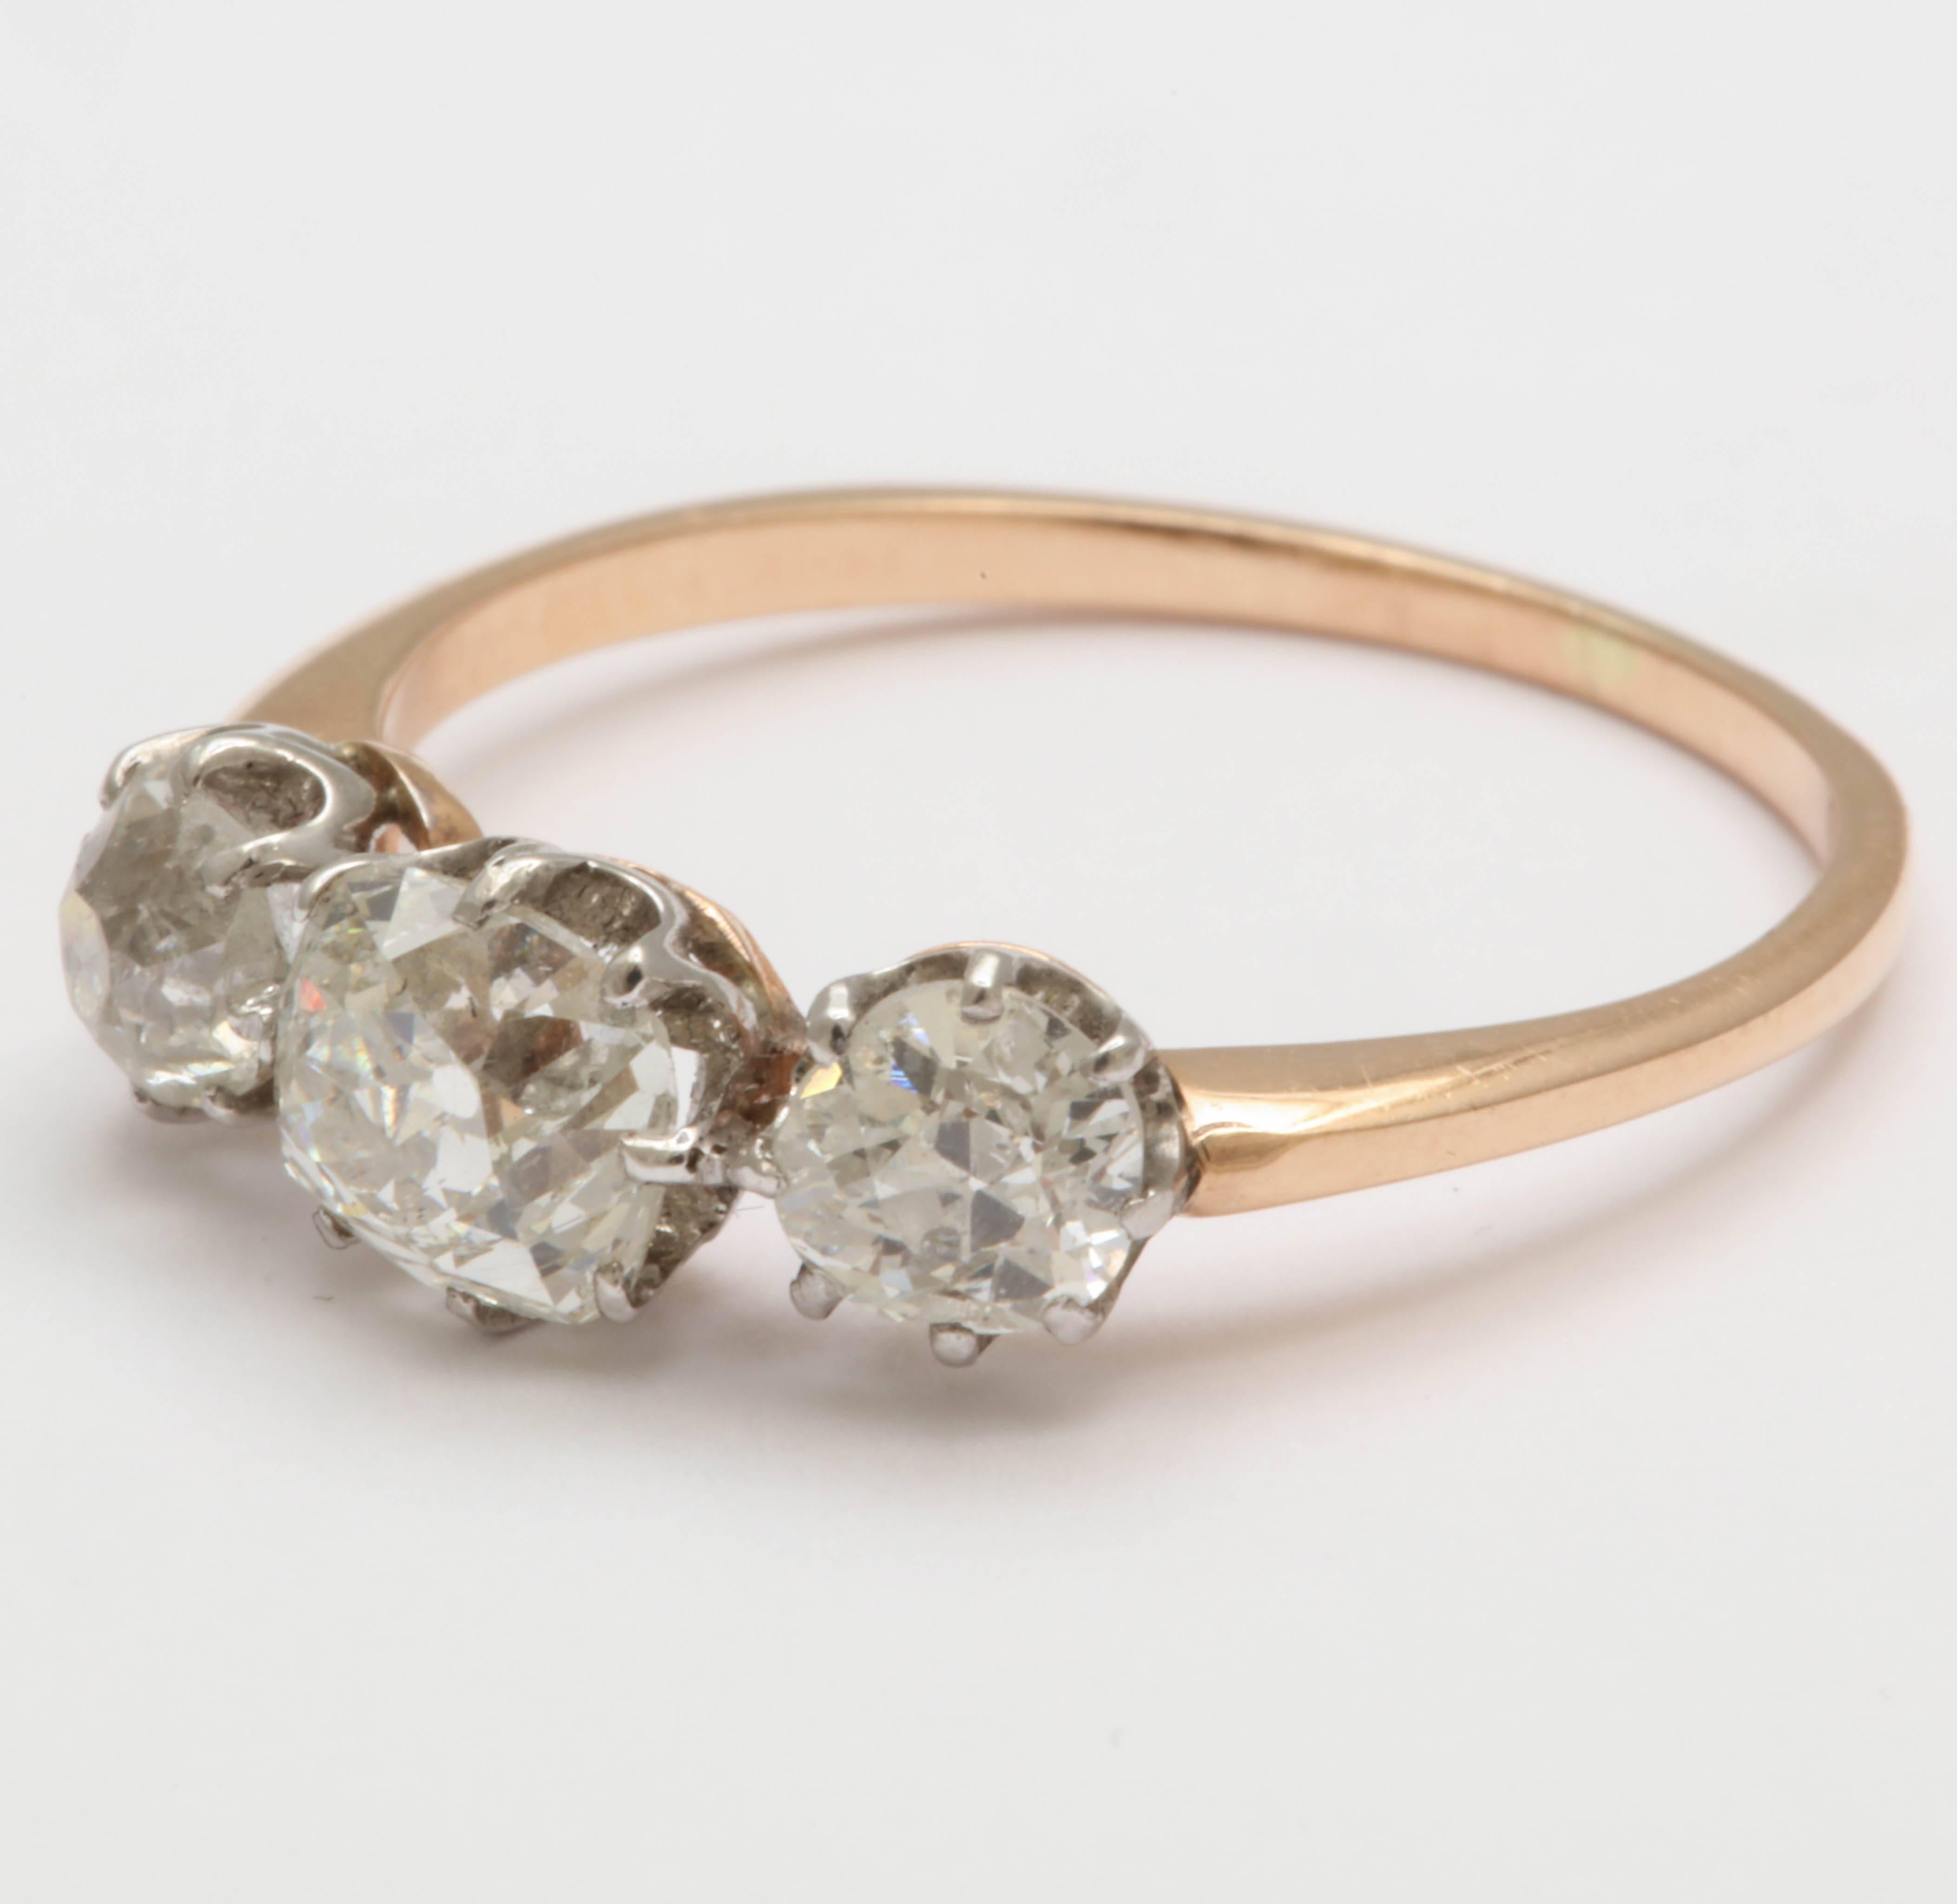 Three old mine cut diamonds are set in silver in an open back prong setting over a rosey-yellow gold. The center stone is approximately .72cts and the side stones approximately .66cts total. Made in the late Victorian era. 